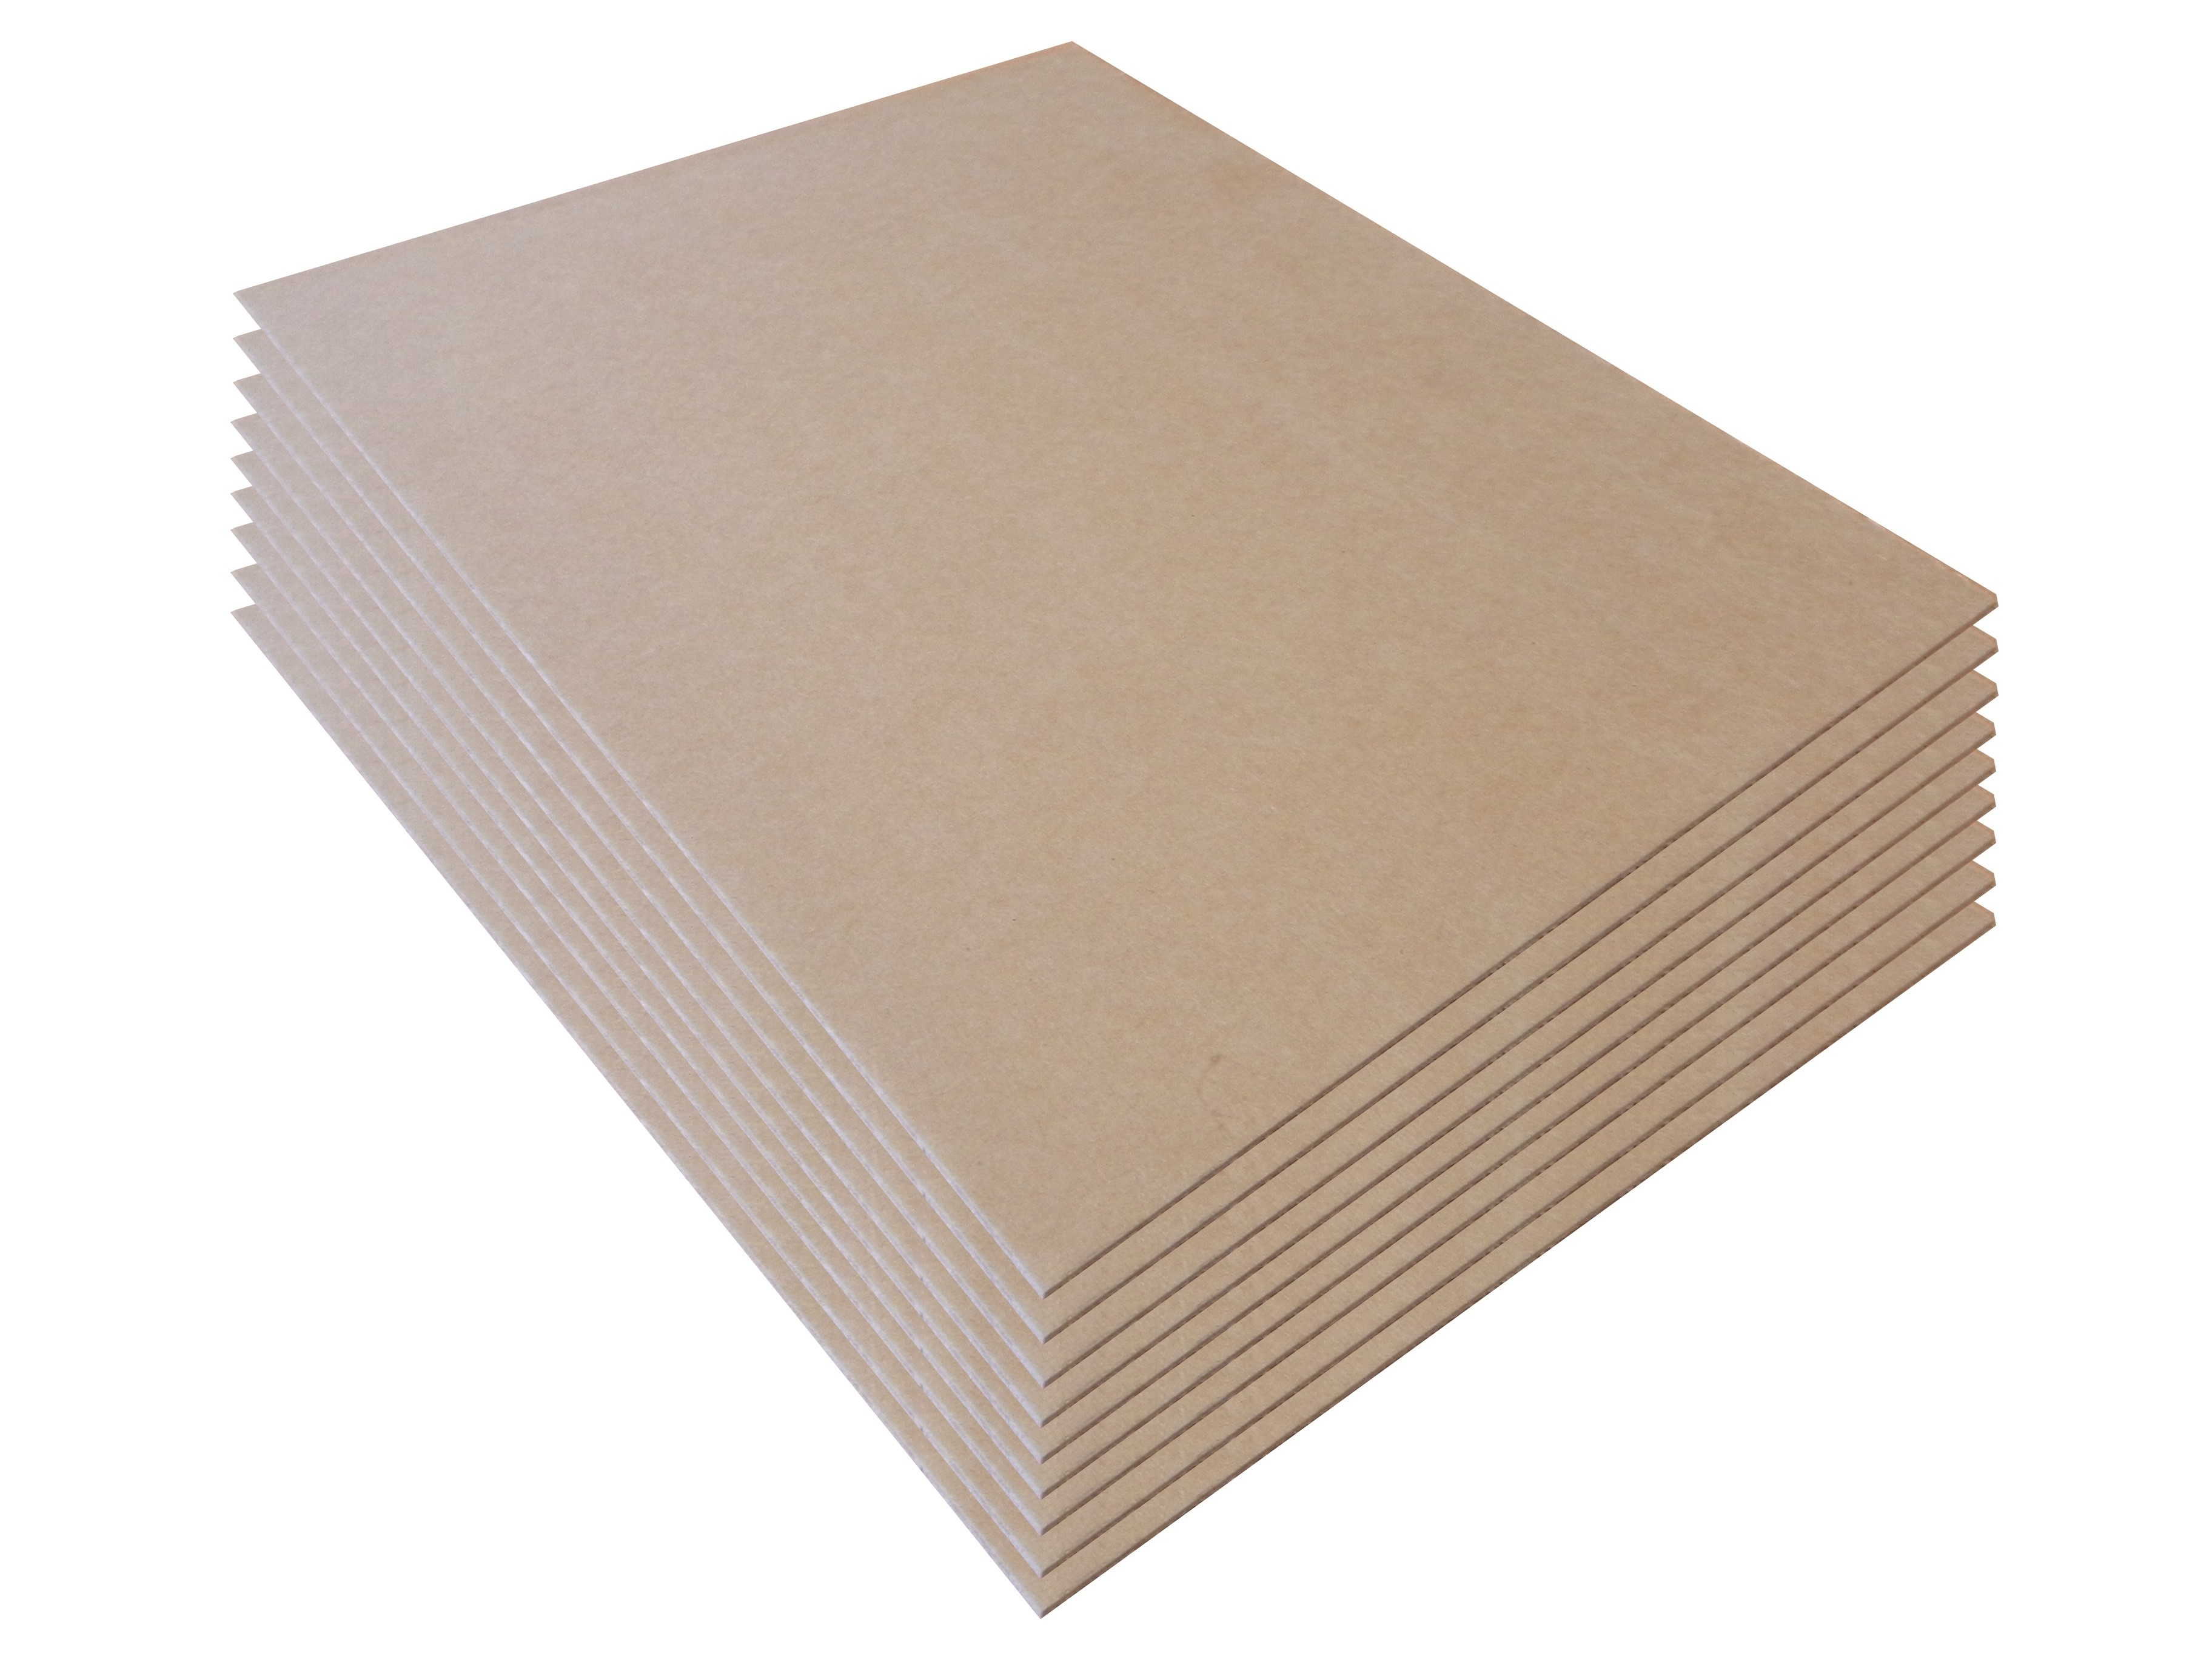 Backing Board 500 x 500mm - 10 pack